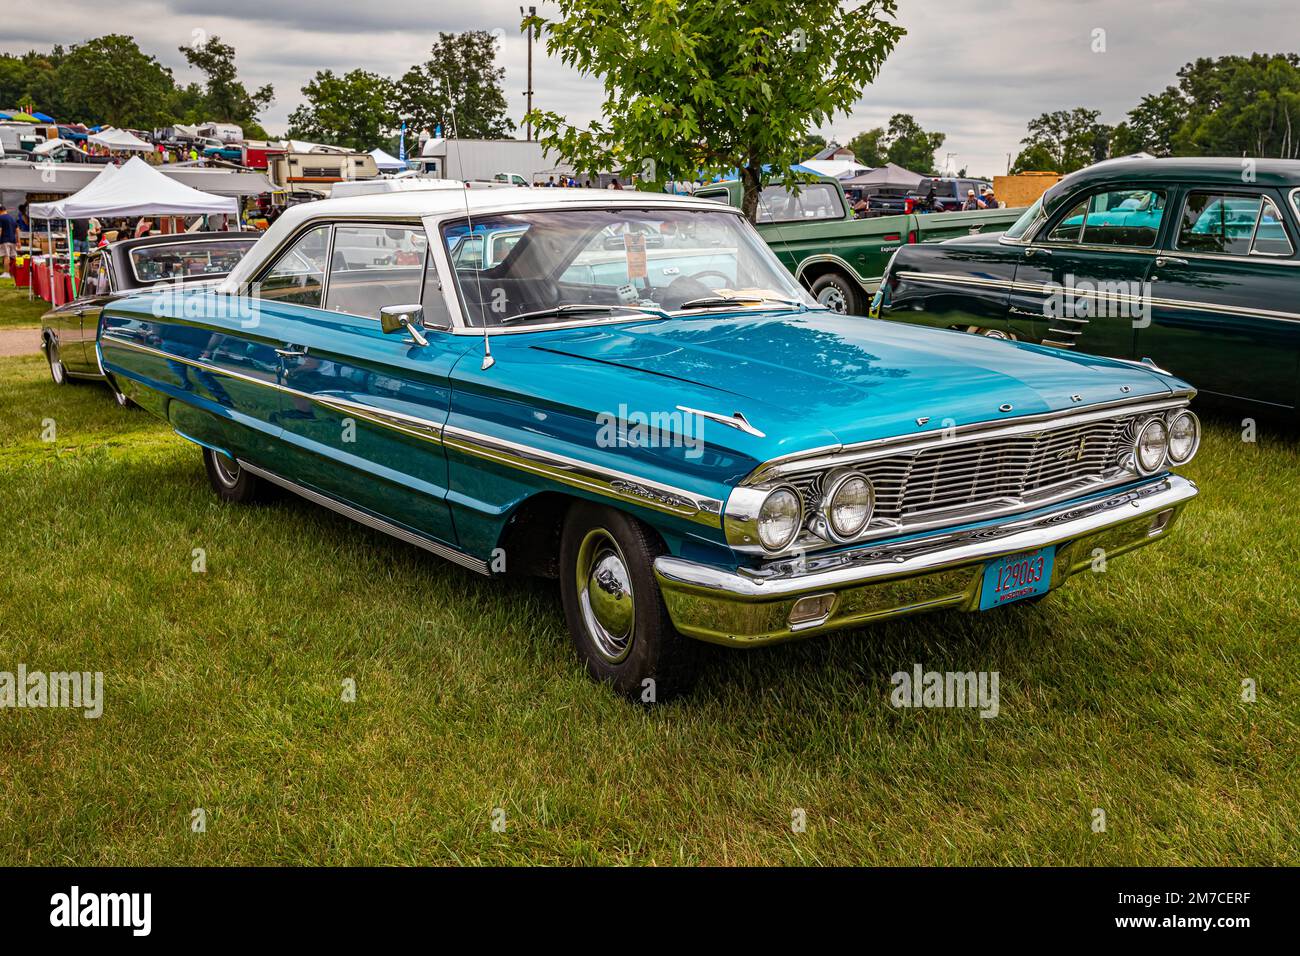 Iola, WI - July 07, 2022: High perspective front corner view of a 1964 Ford Galaxie 500 2 Door Hardtop at a local car show. Stock Photo